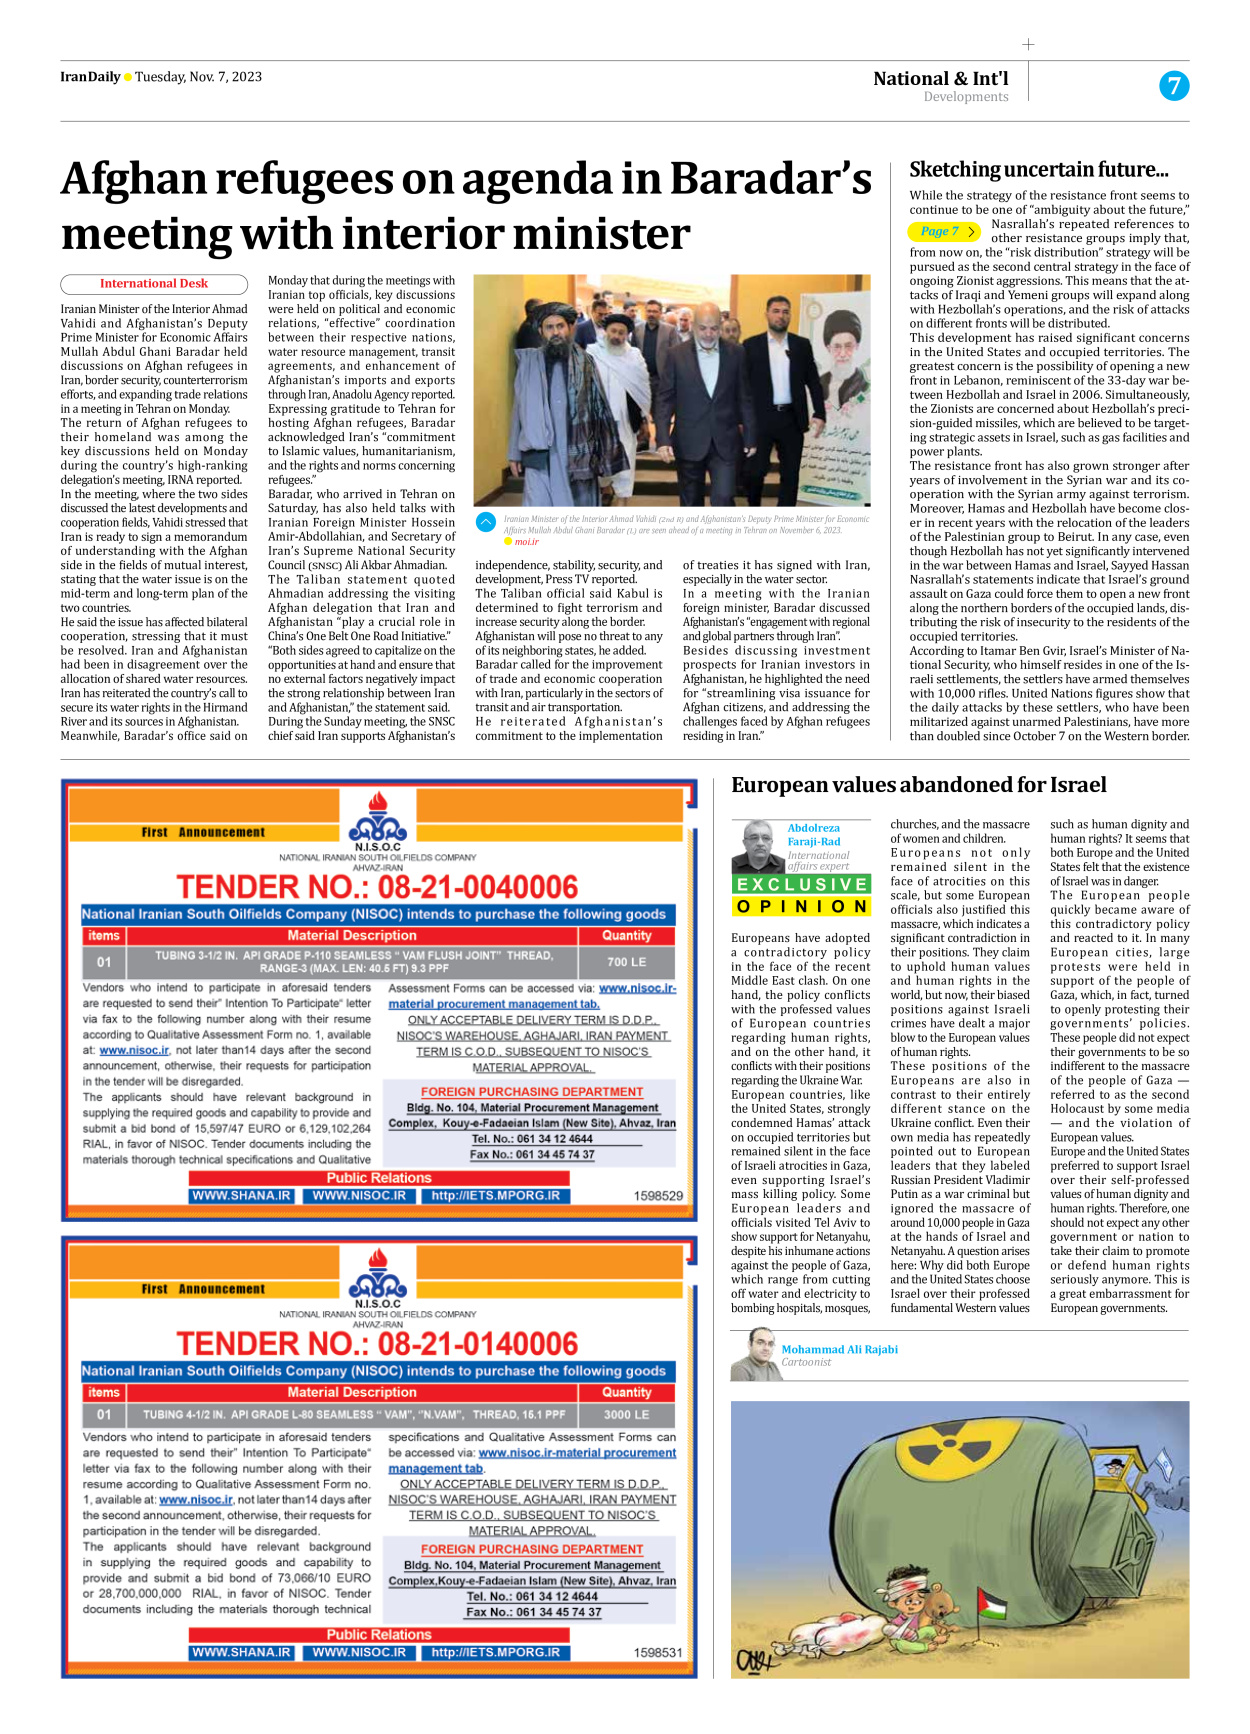 Iran Daily - Number Seven Thousand Four Hundred and Twenty Eight - 07 November 2023 - Page 7